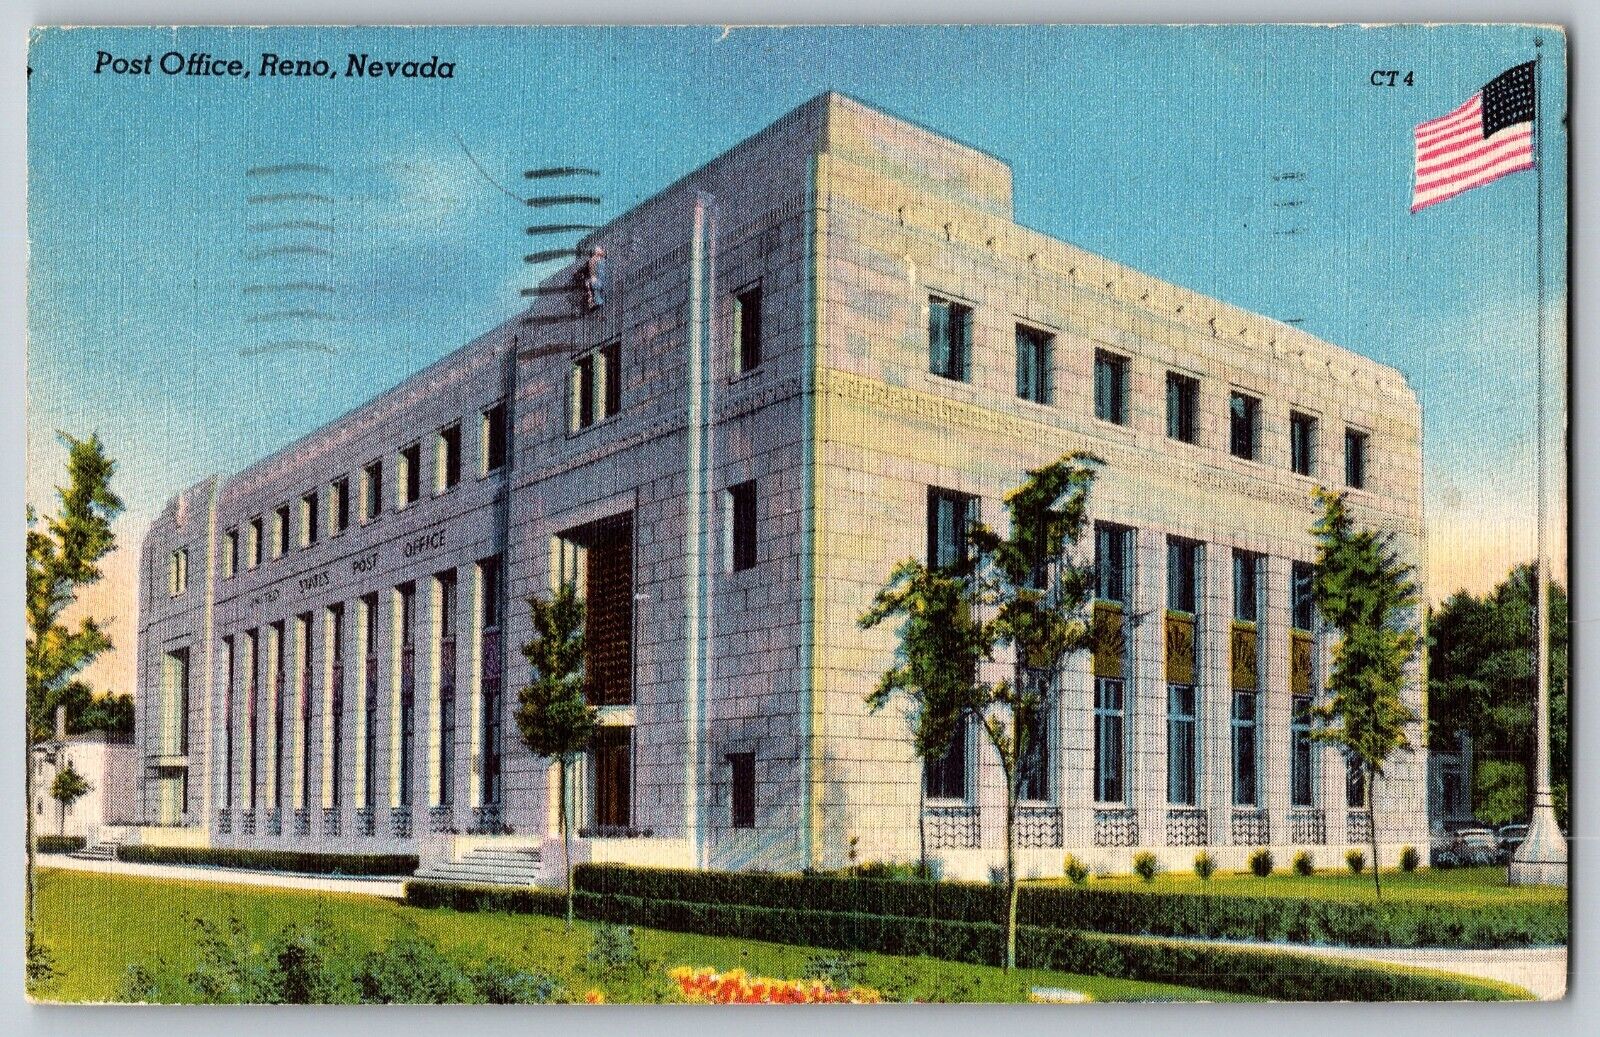 Reno, Nevada NV - The Modern Post Office - Vintage Postcard - Posted 1949